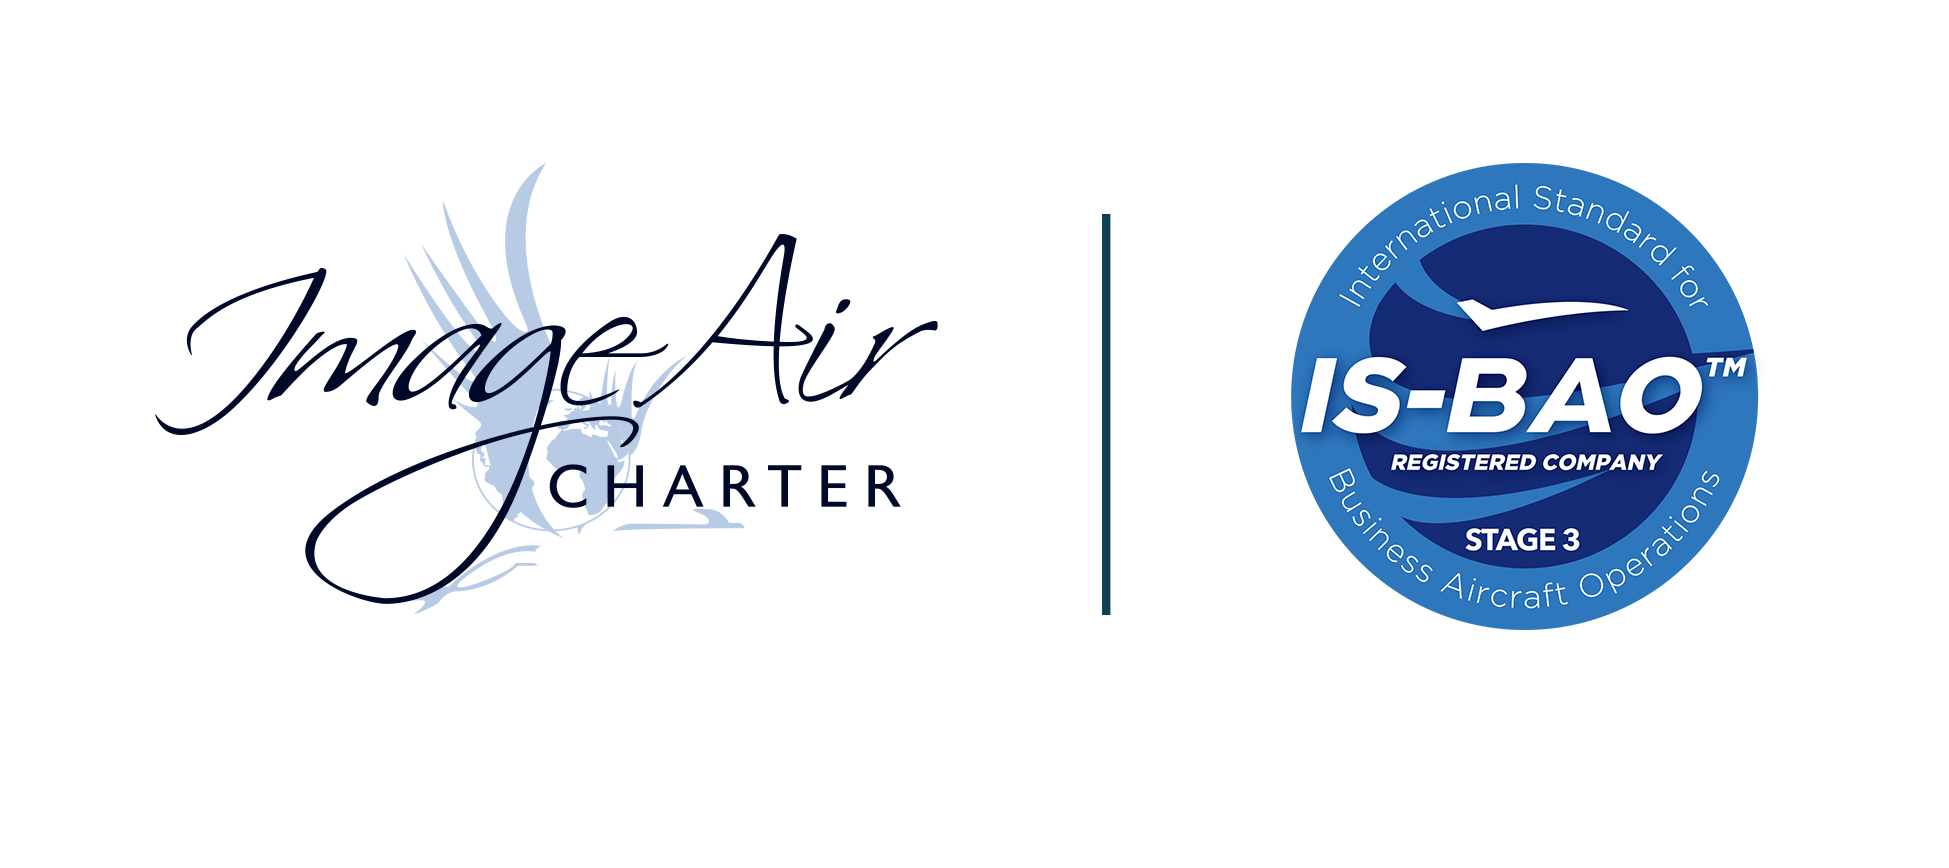 Image Air Charter Ltd. Receives IS-BAO Stage 3 Certification